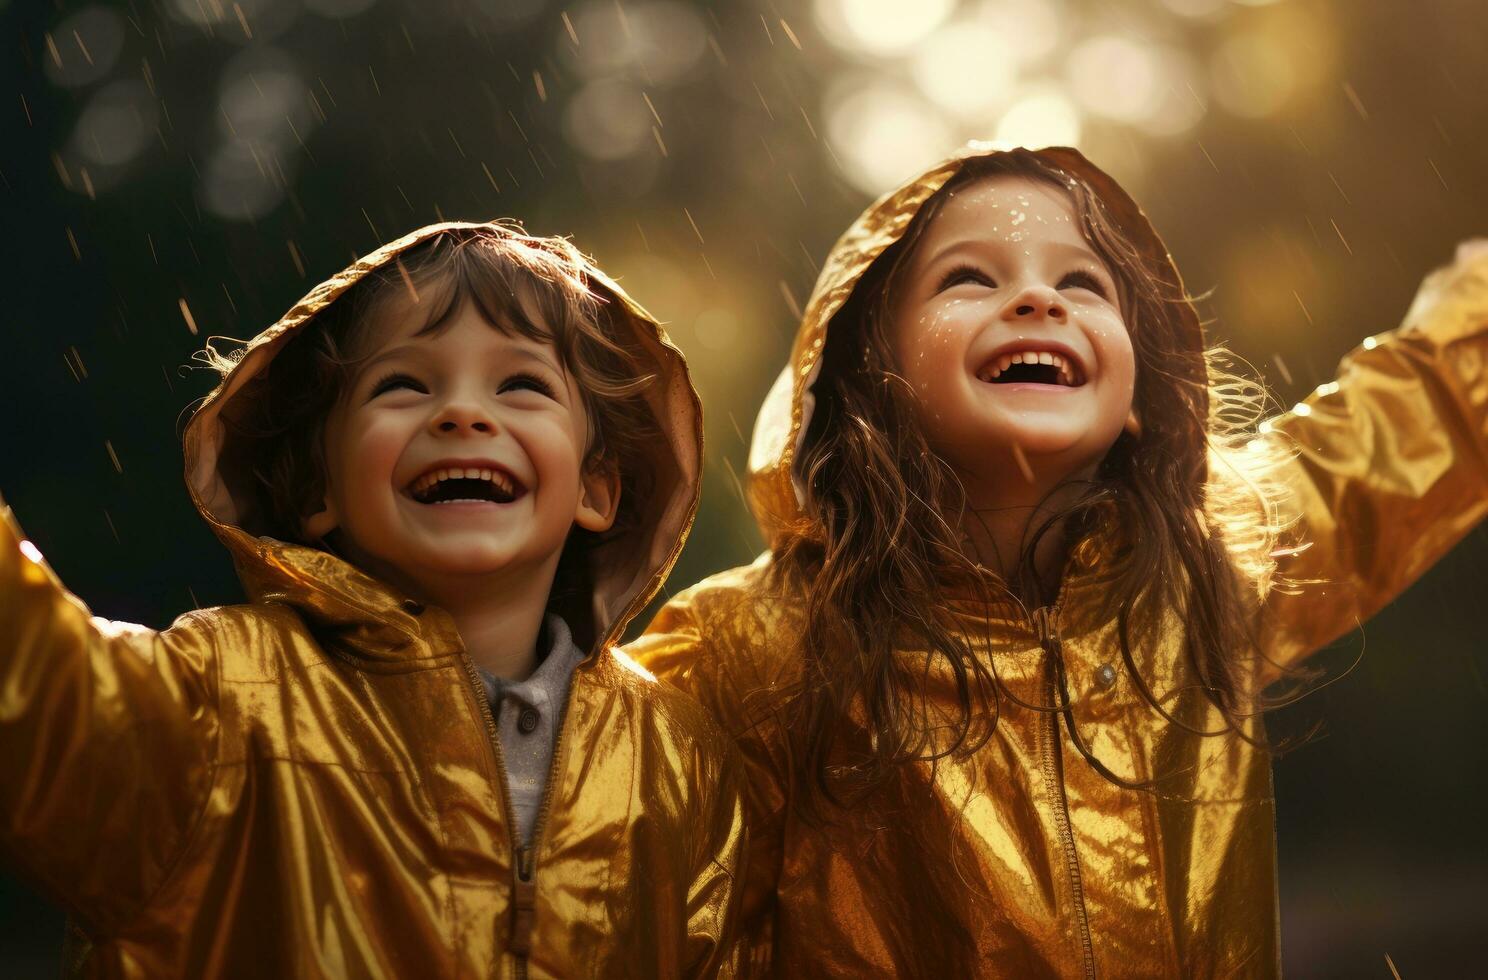 AI generated children in raincoats enjoying themselves, photo